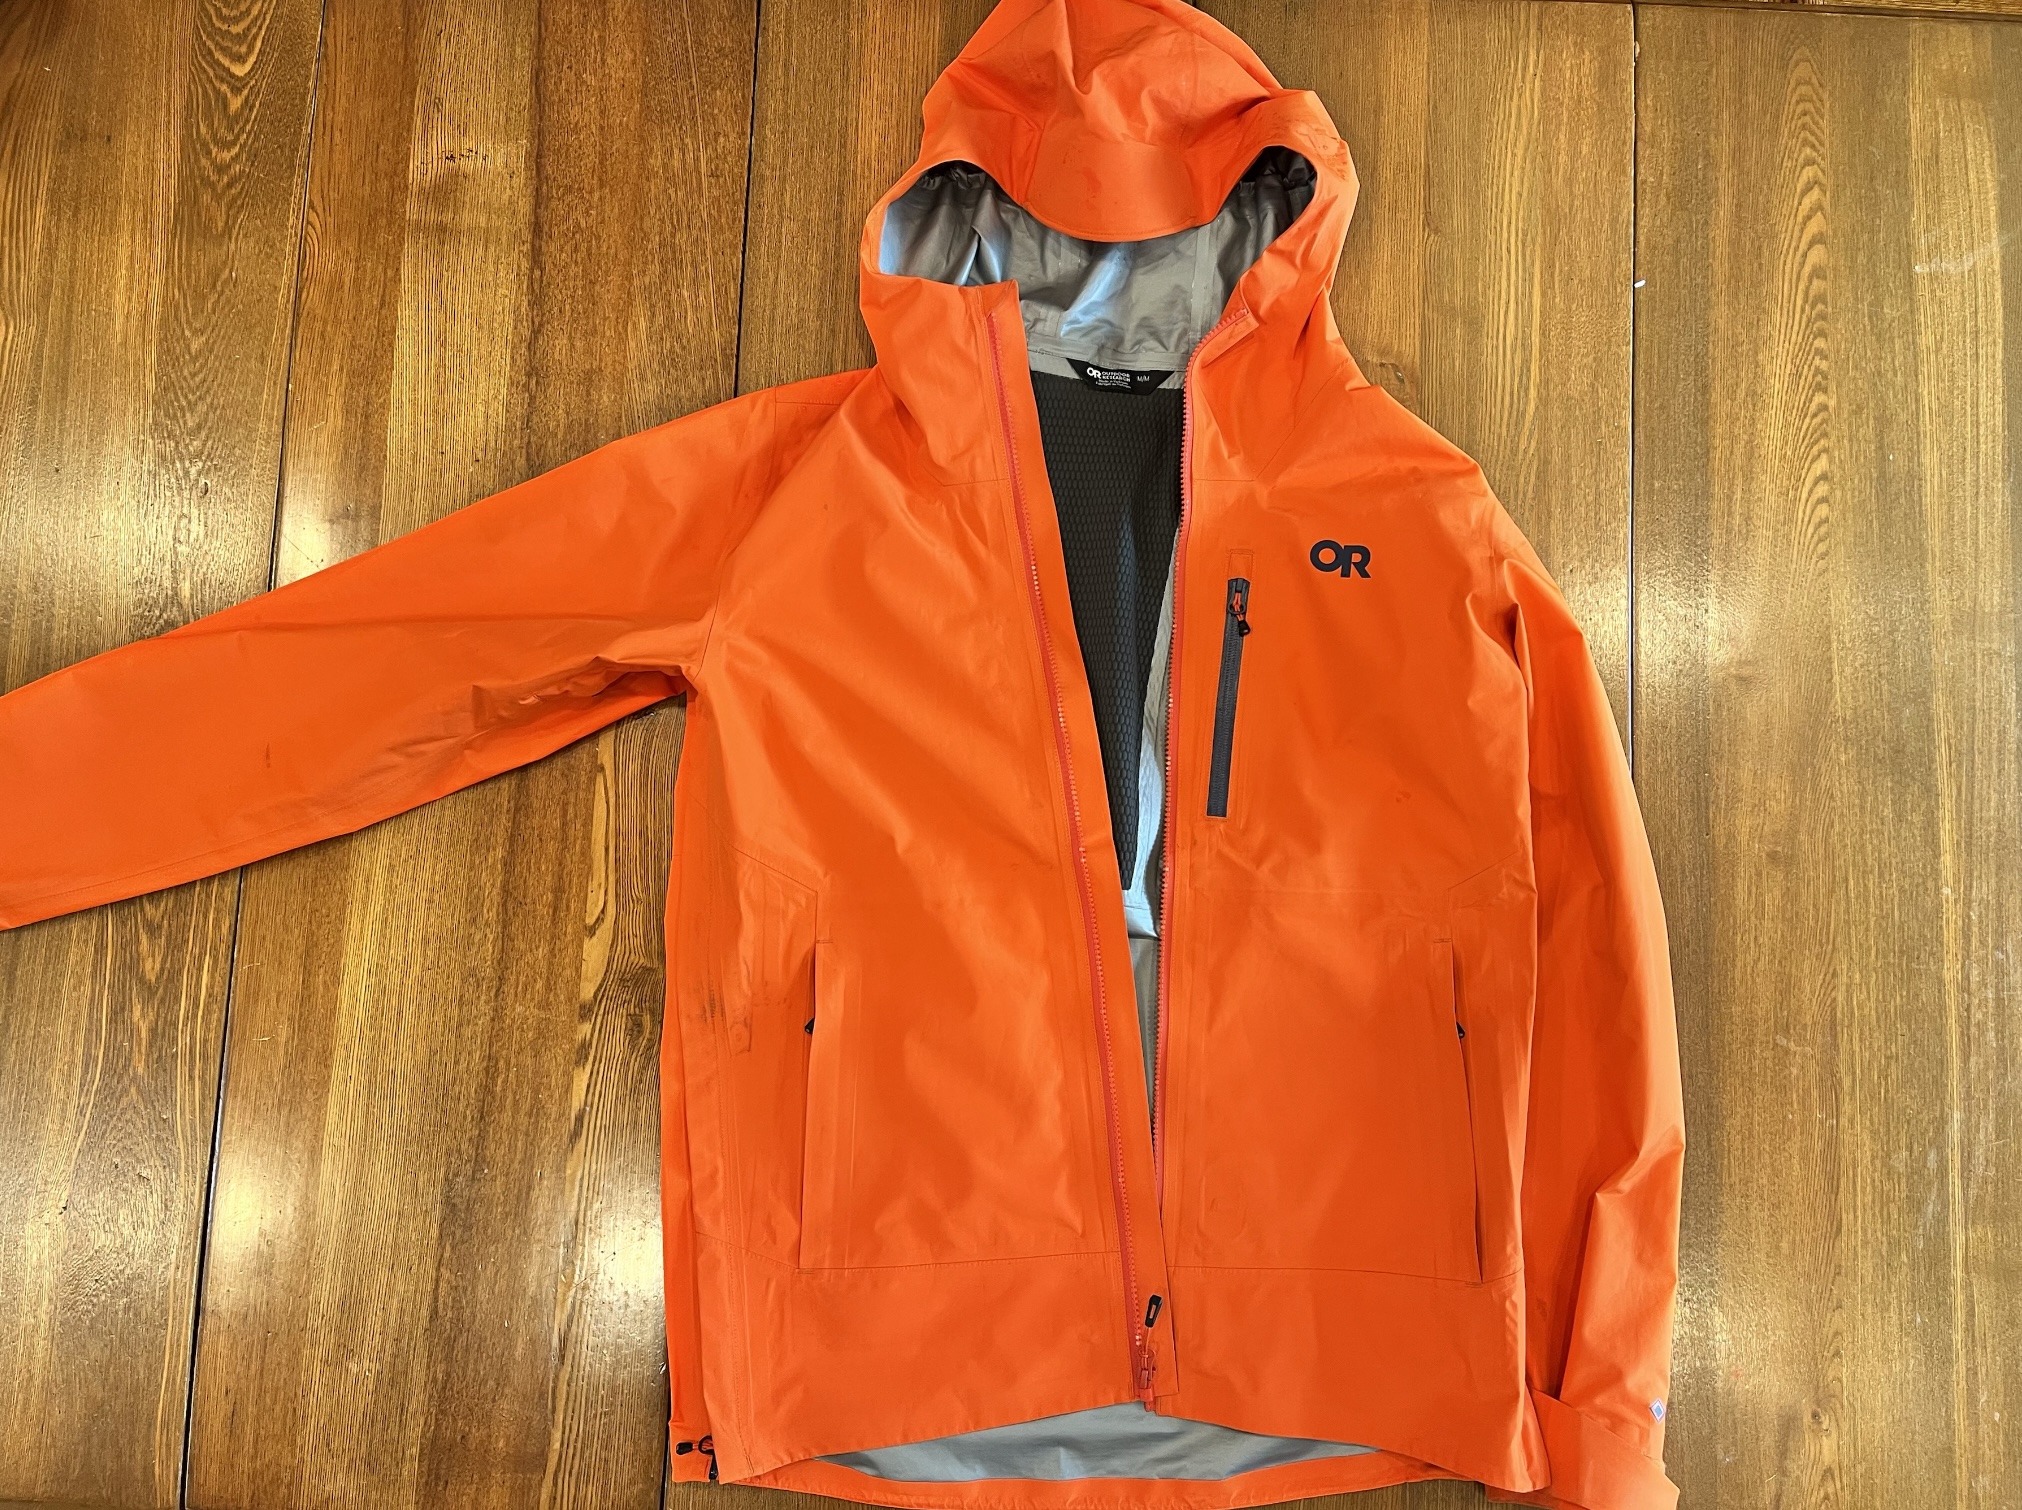 Gear Review: Outdoor Research Men's Foray Super Stretch Jacket